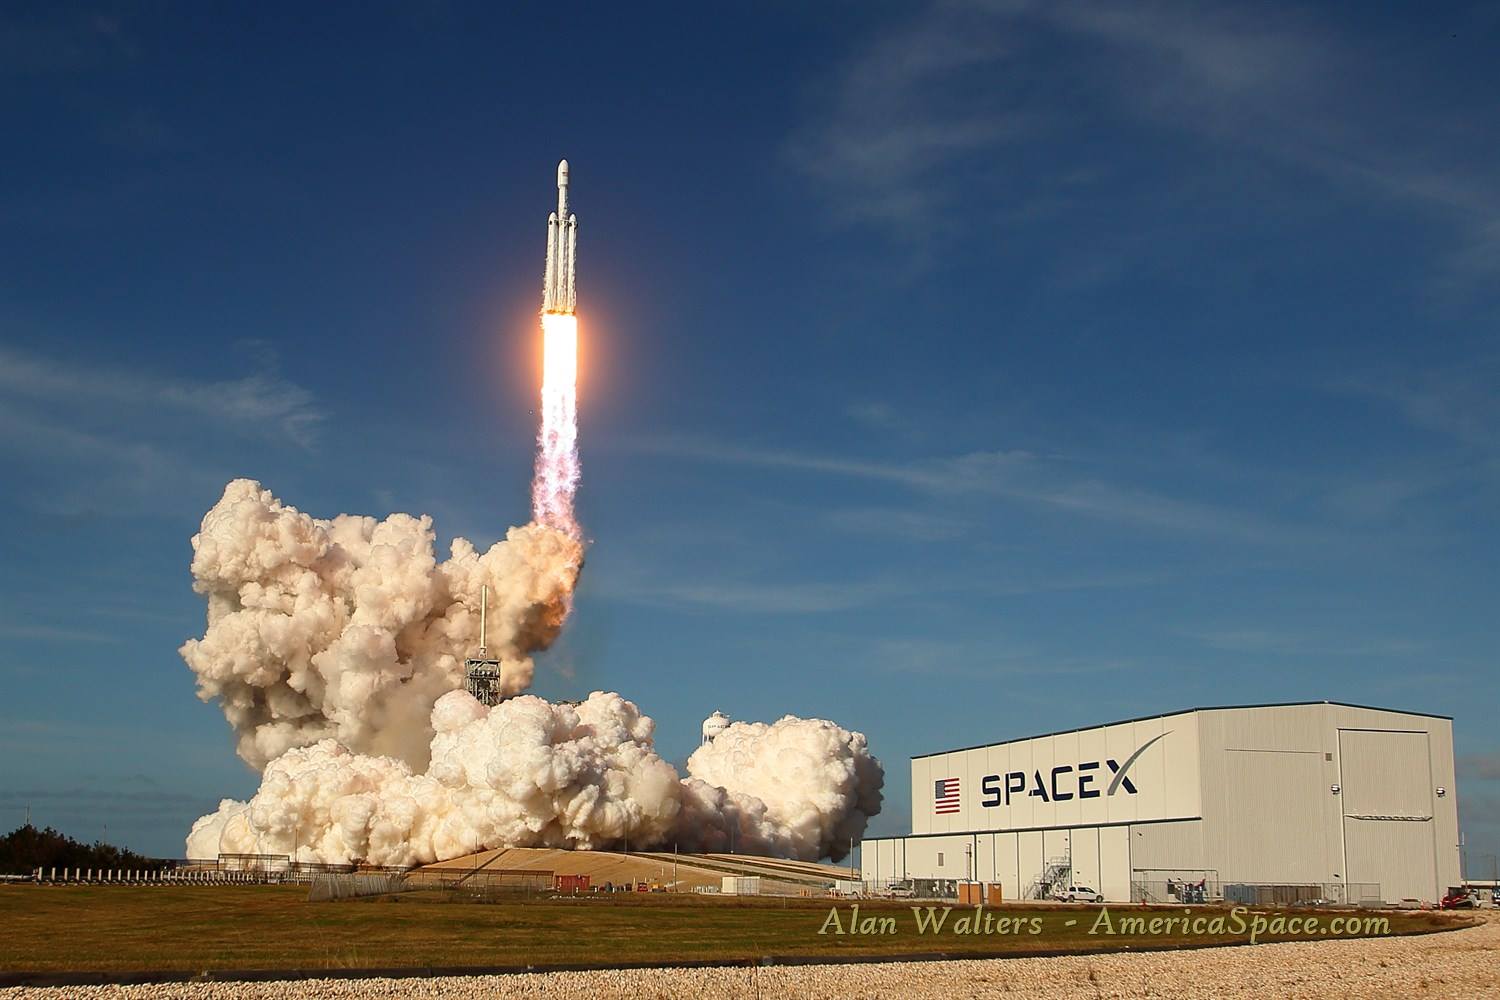 Long-Awaited Maiden Voyage of Falcon Heavy Brings Deep-Space Exploration Closer ...